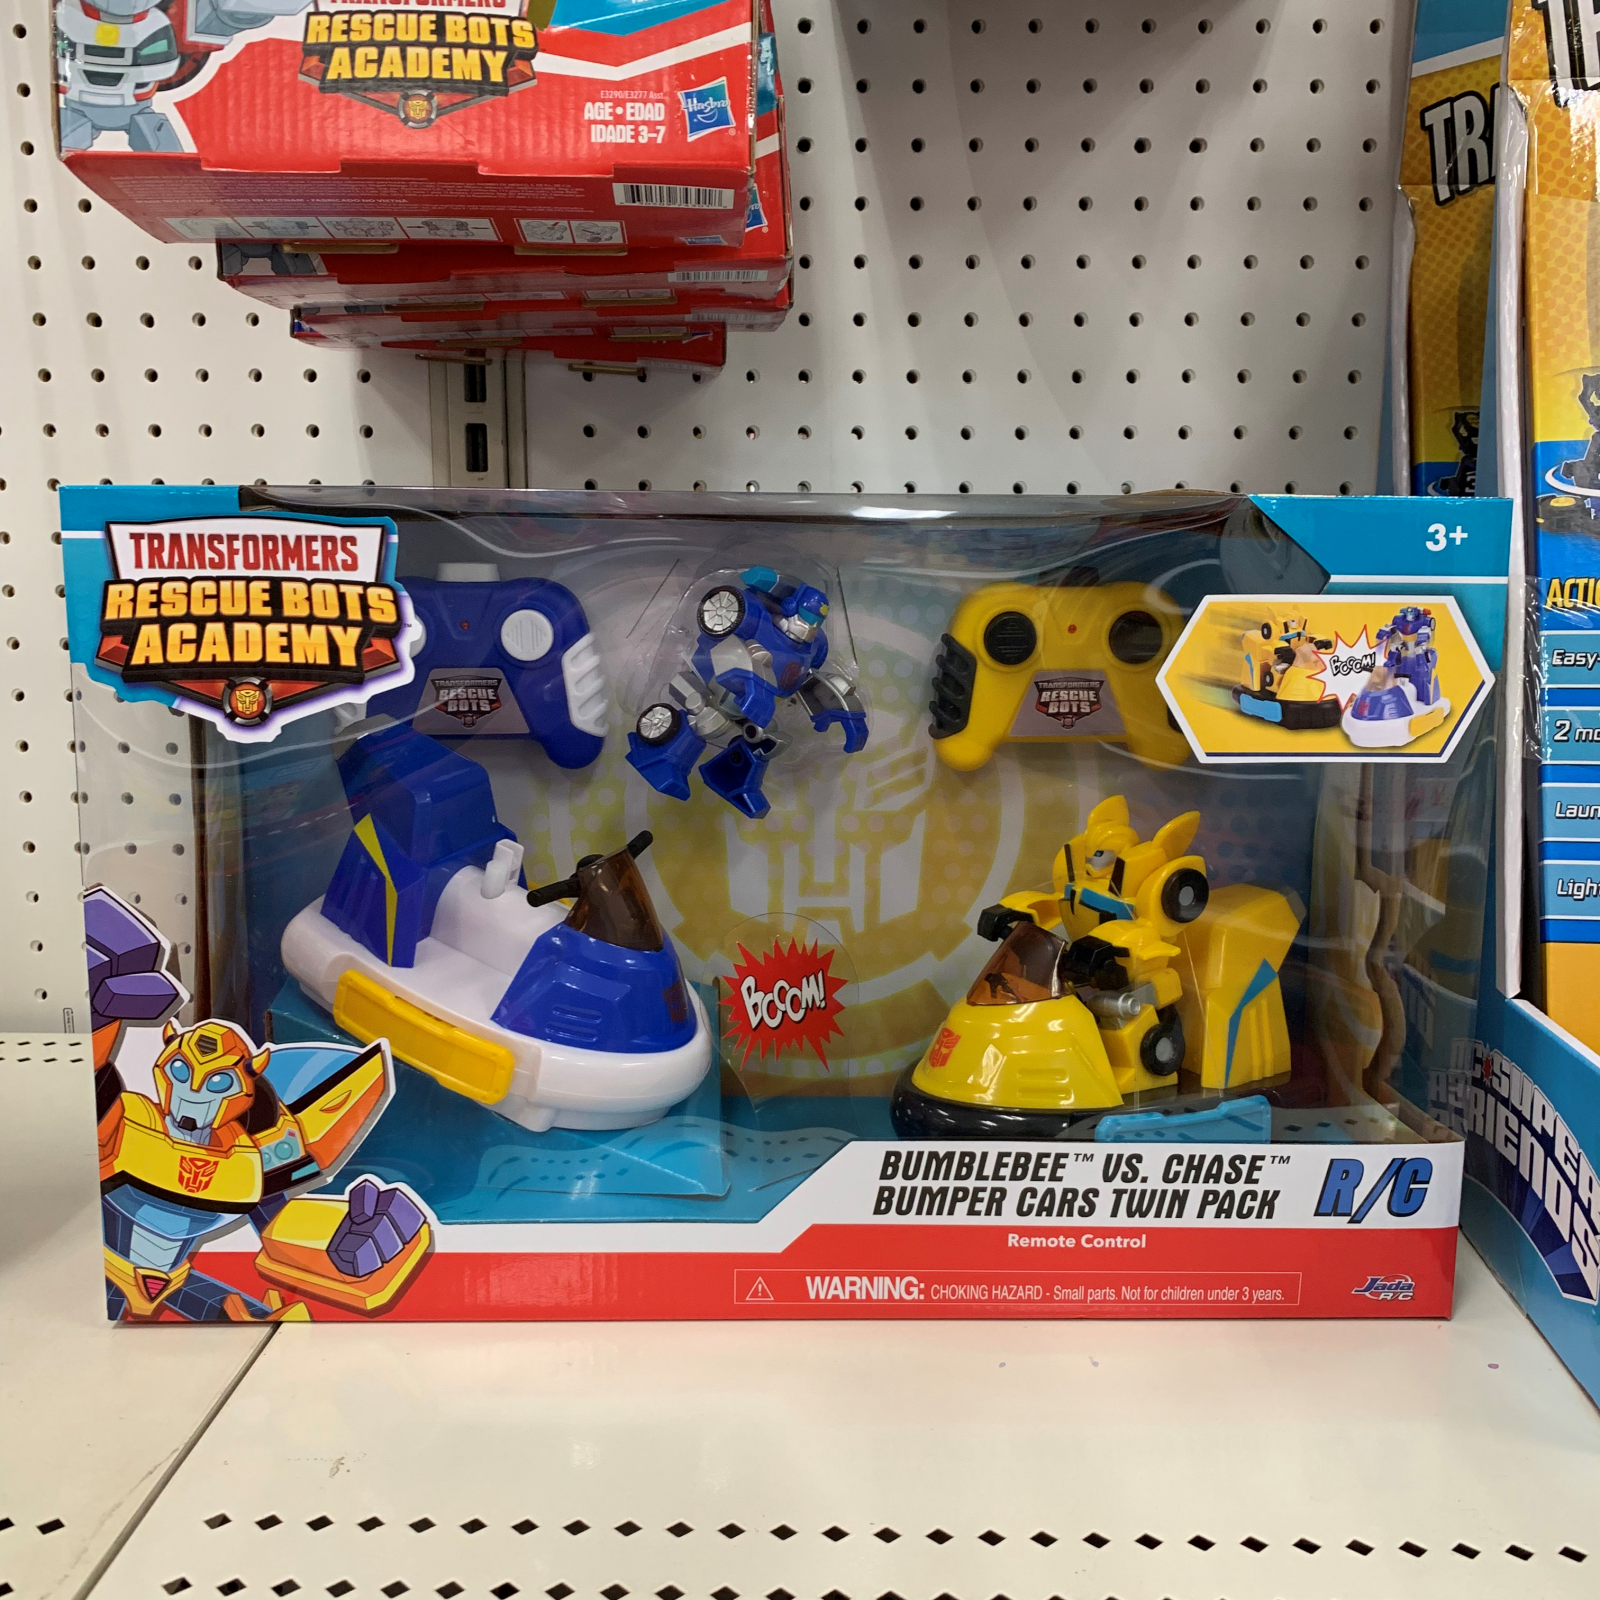 Transformers News: Transformers Rescue Bots Academy Bumblebee Vs Chase RC Bumper Cars Spotted at US Target